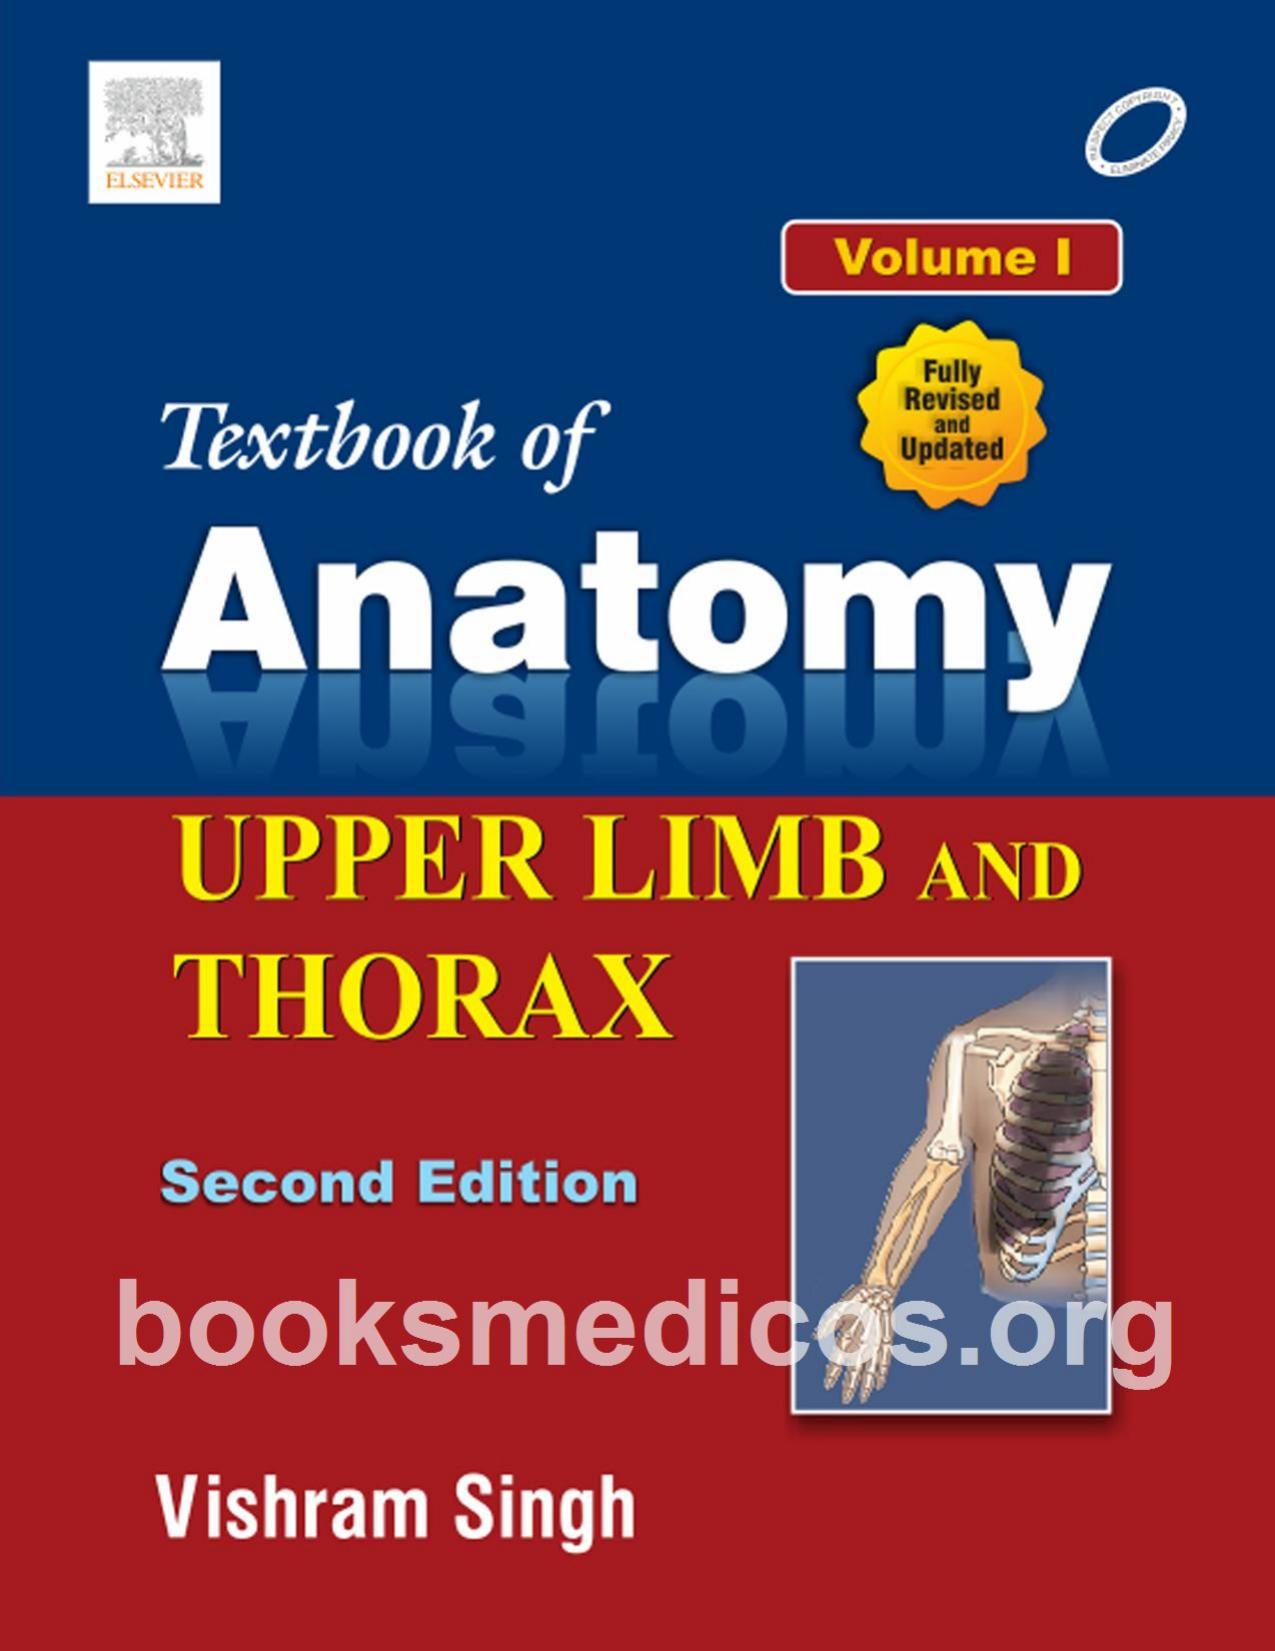 TEXTBOOK OF ANATOMY UPPER LIMB AND THORAX